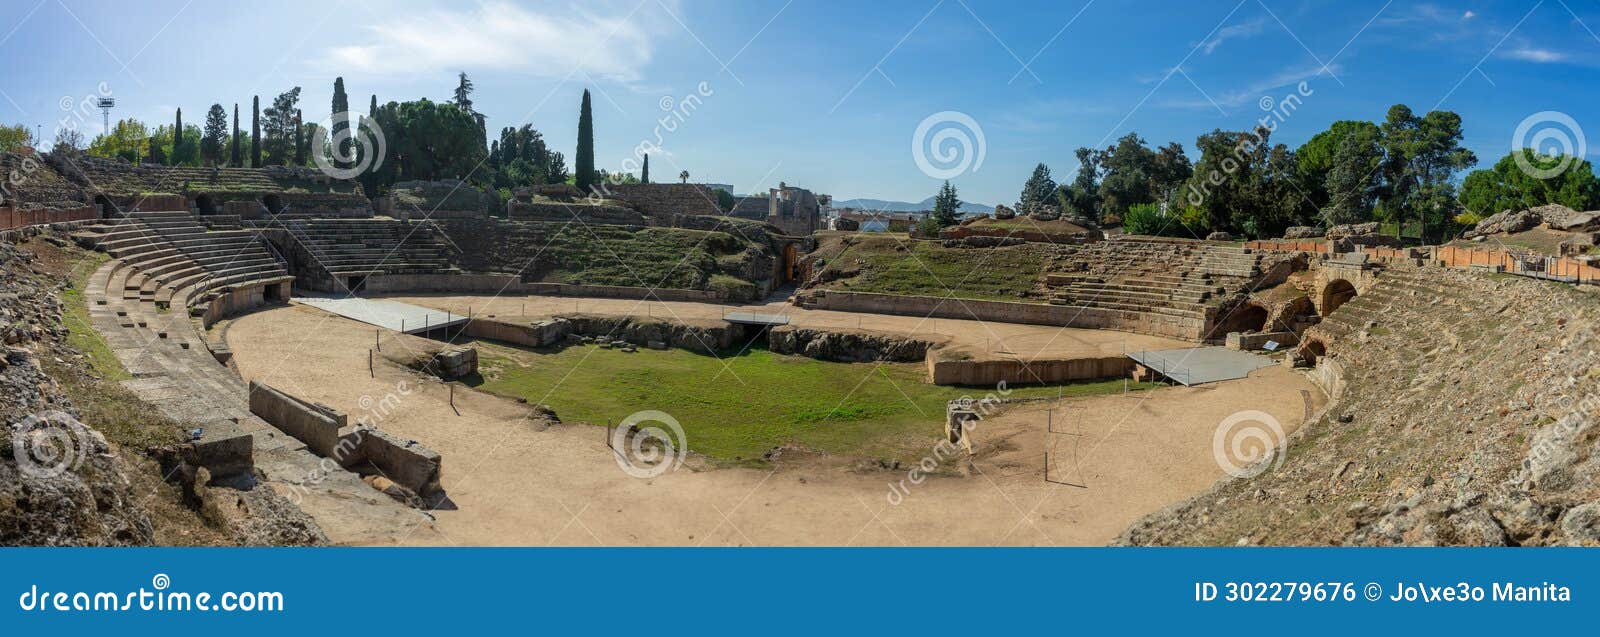 stunning view of mÃ©rida's roman amphitheater, a historical gem showcasing ancient architecture.